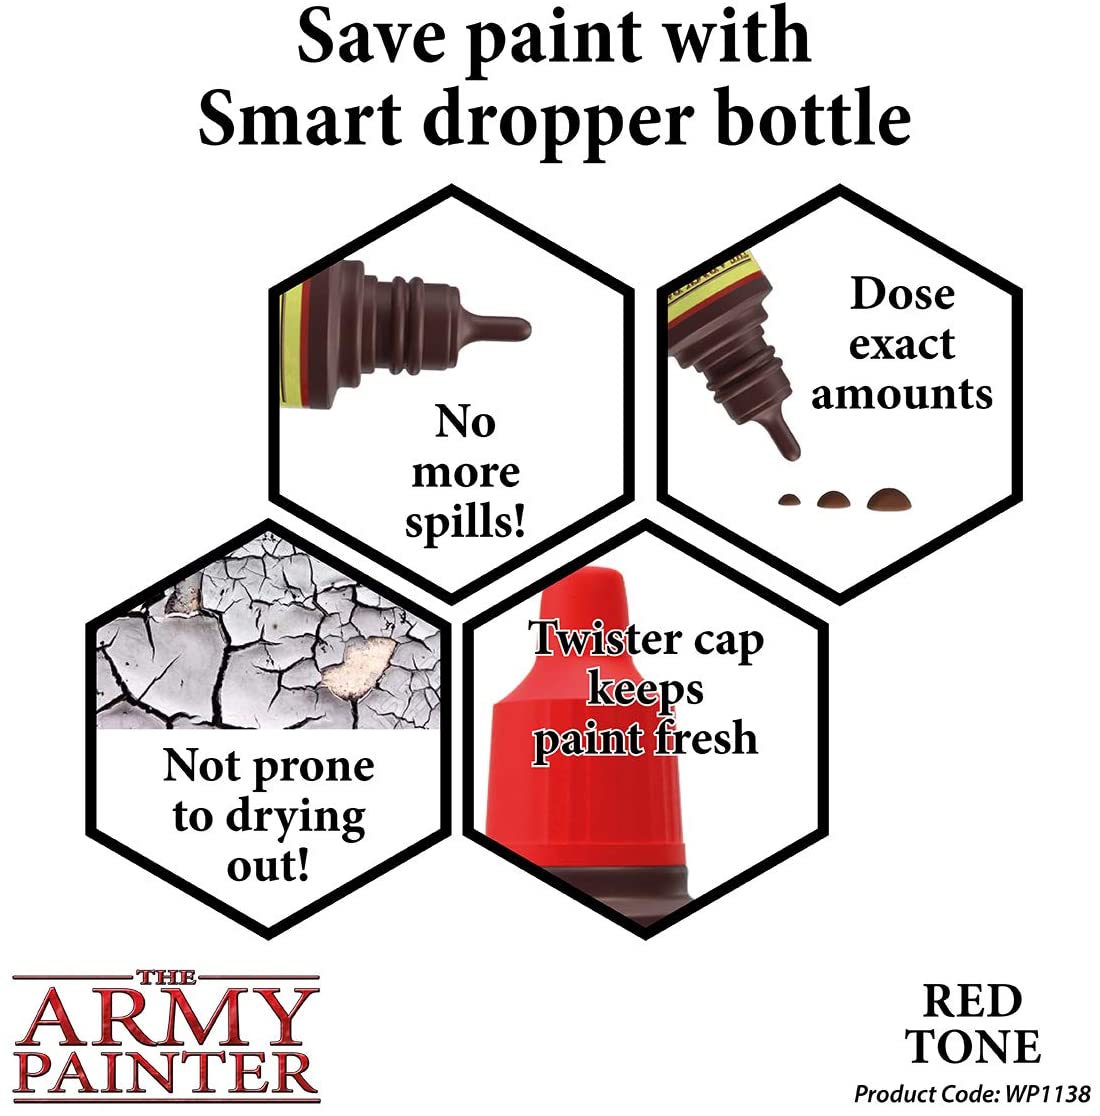 The Army Painter - Quickshade Washes: Red Tone (18ml/0.6oz)